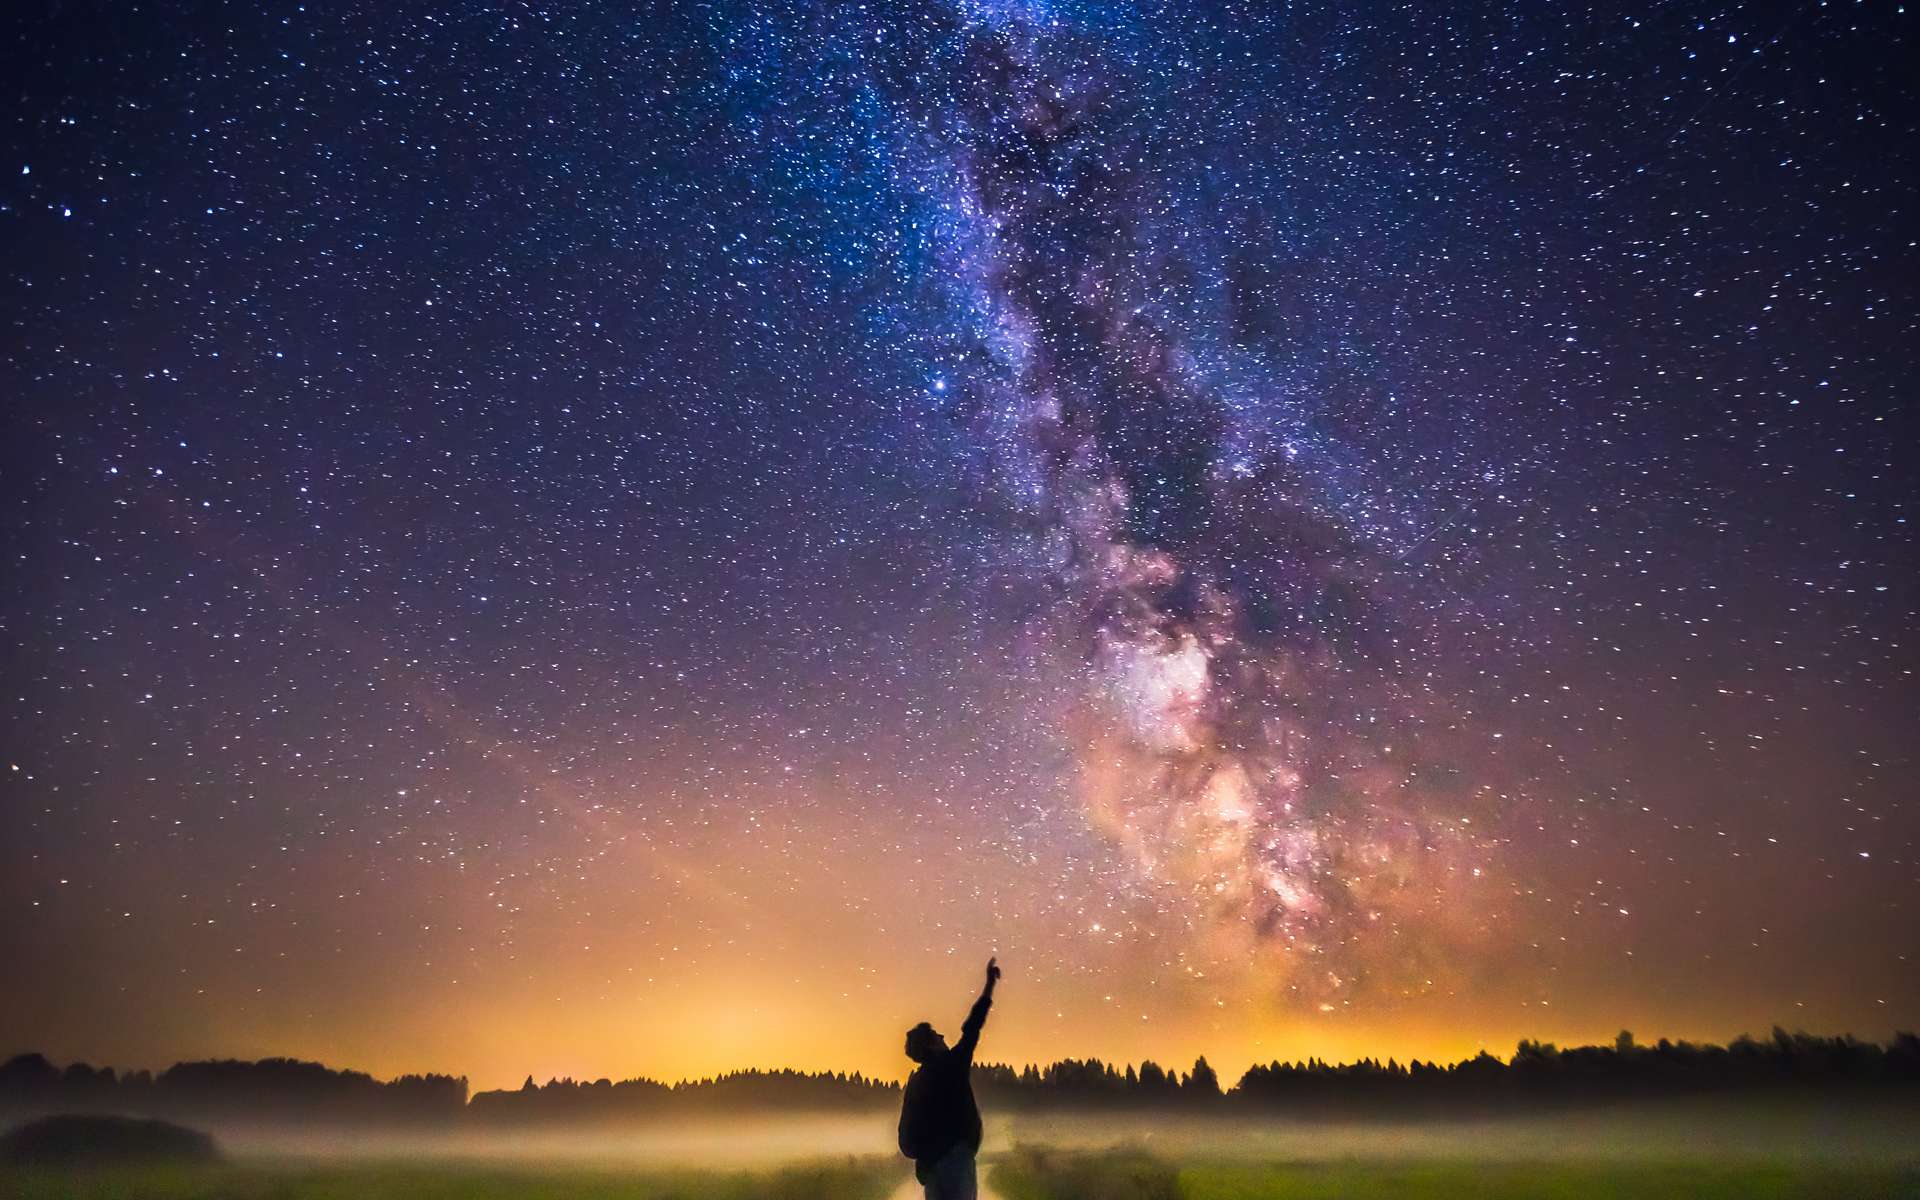 How to photograph the Milky Way?